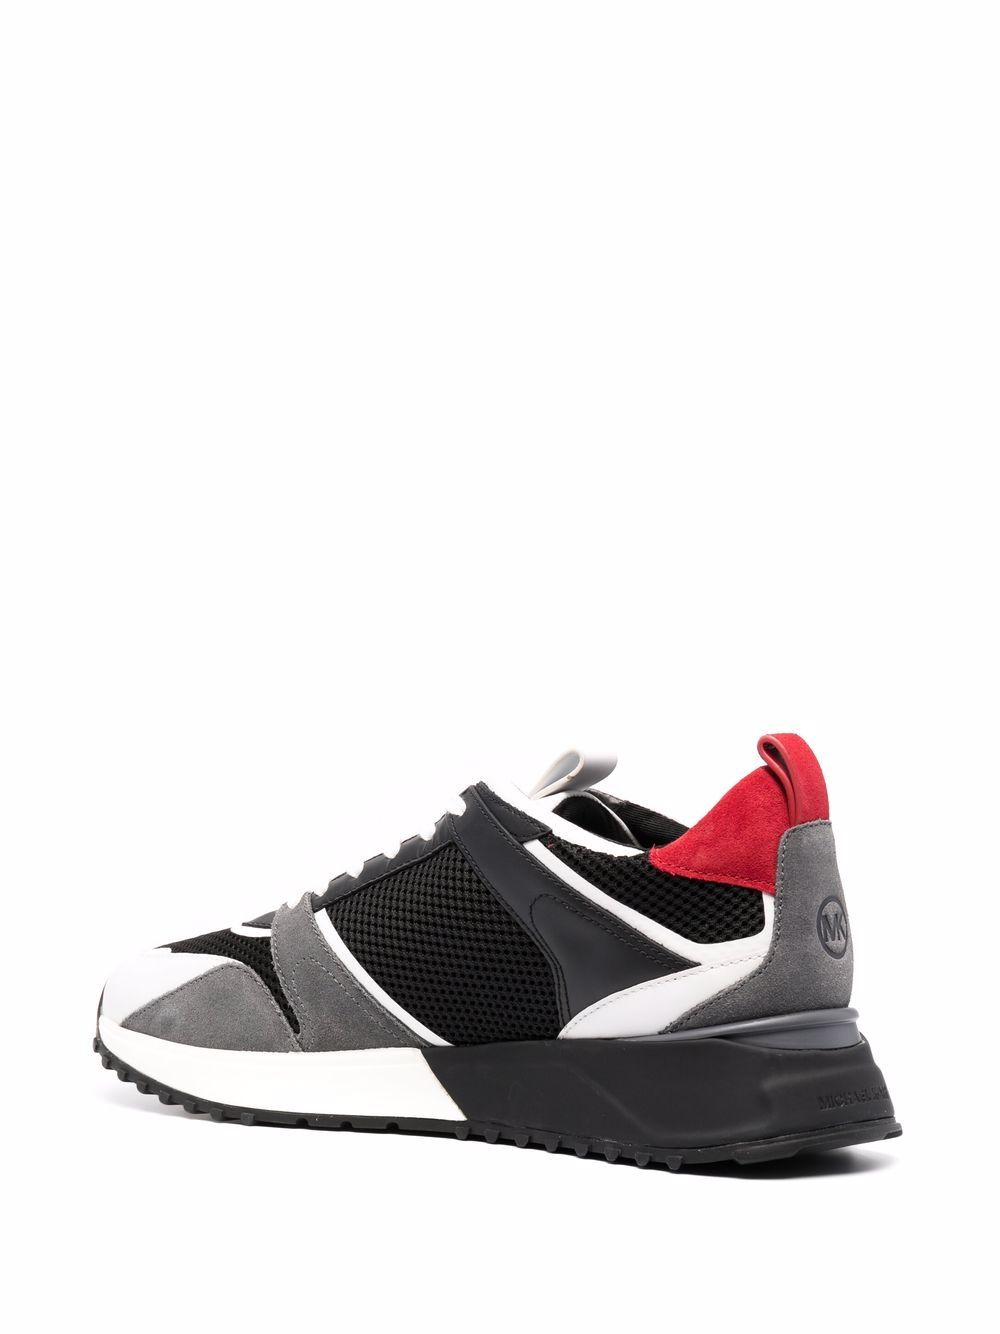 Shop Michael Kors Theo panelled trainers with Express Delivery - FARFETCH